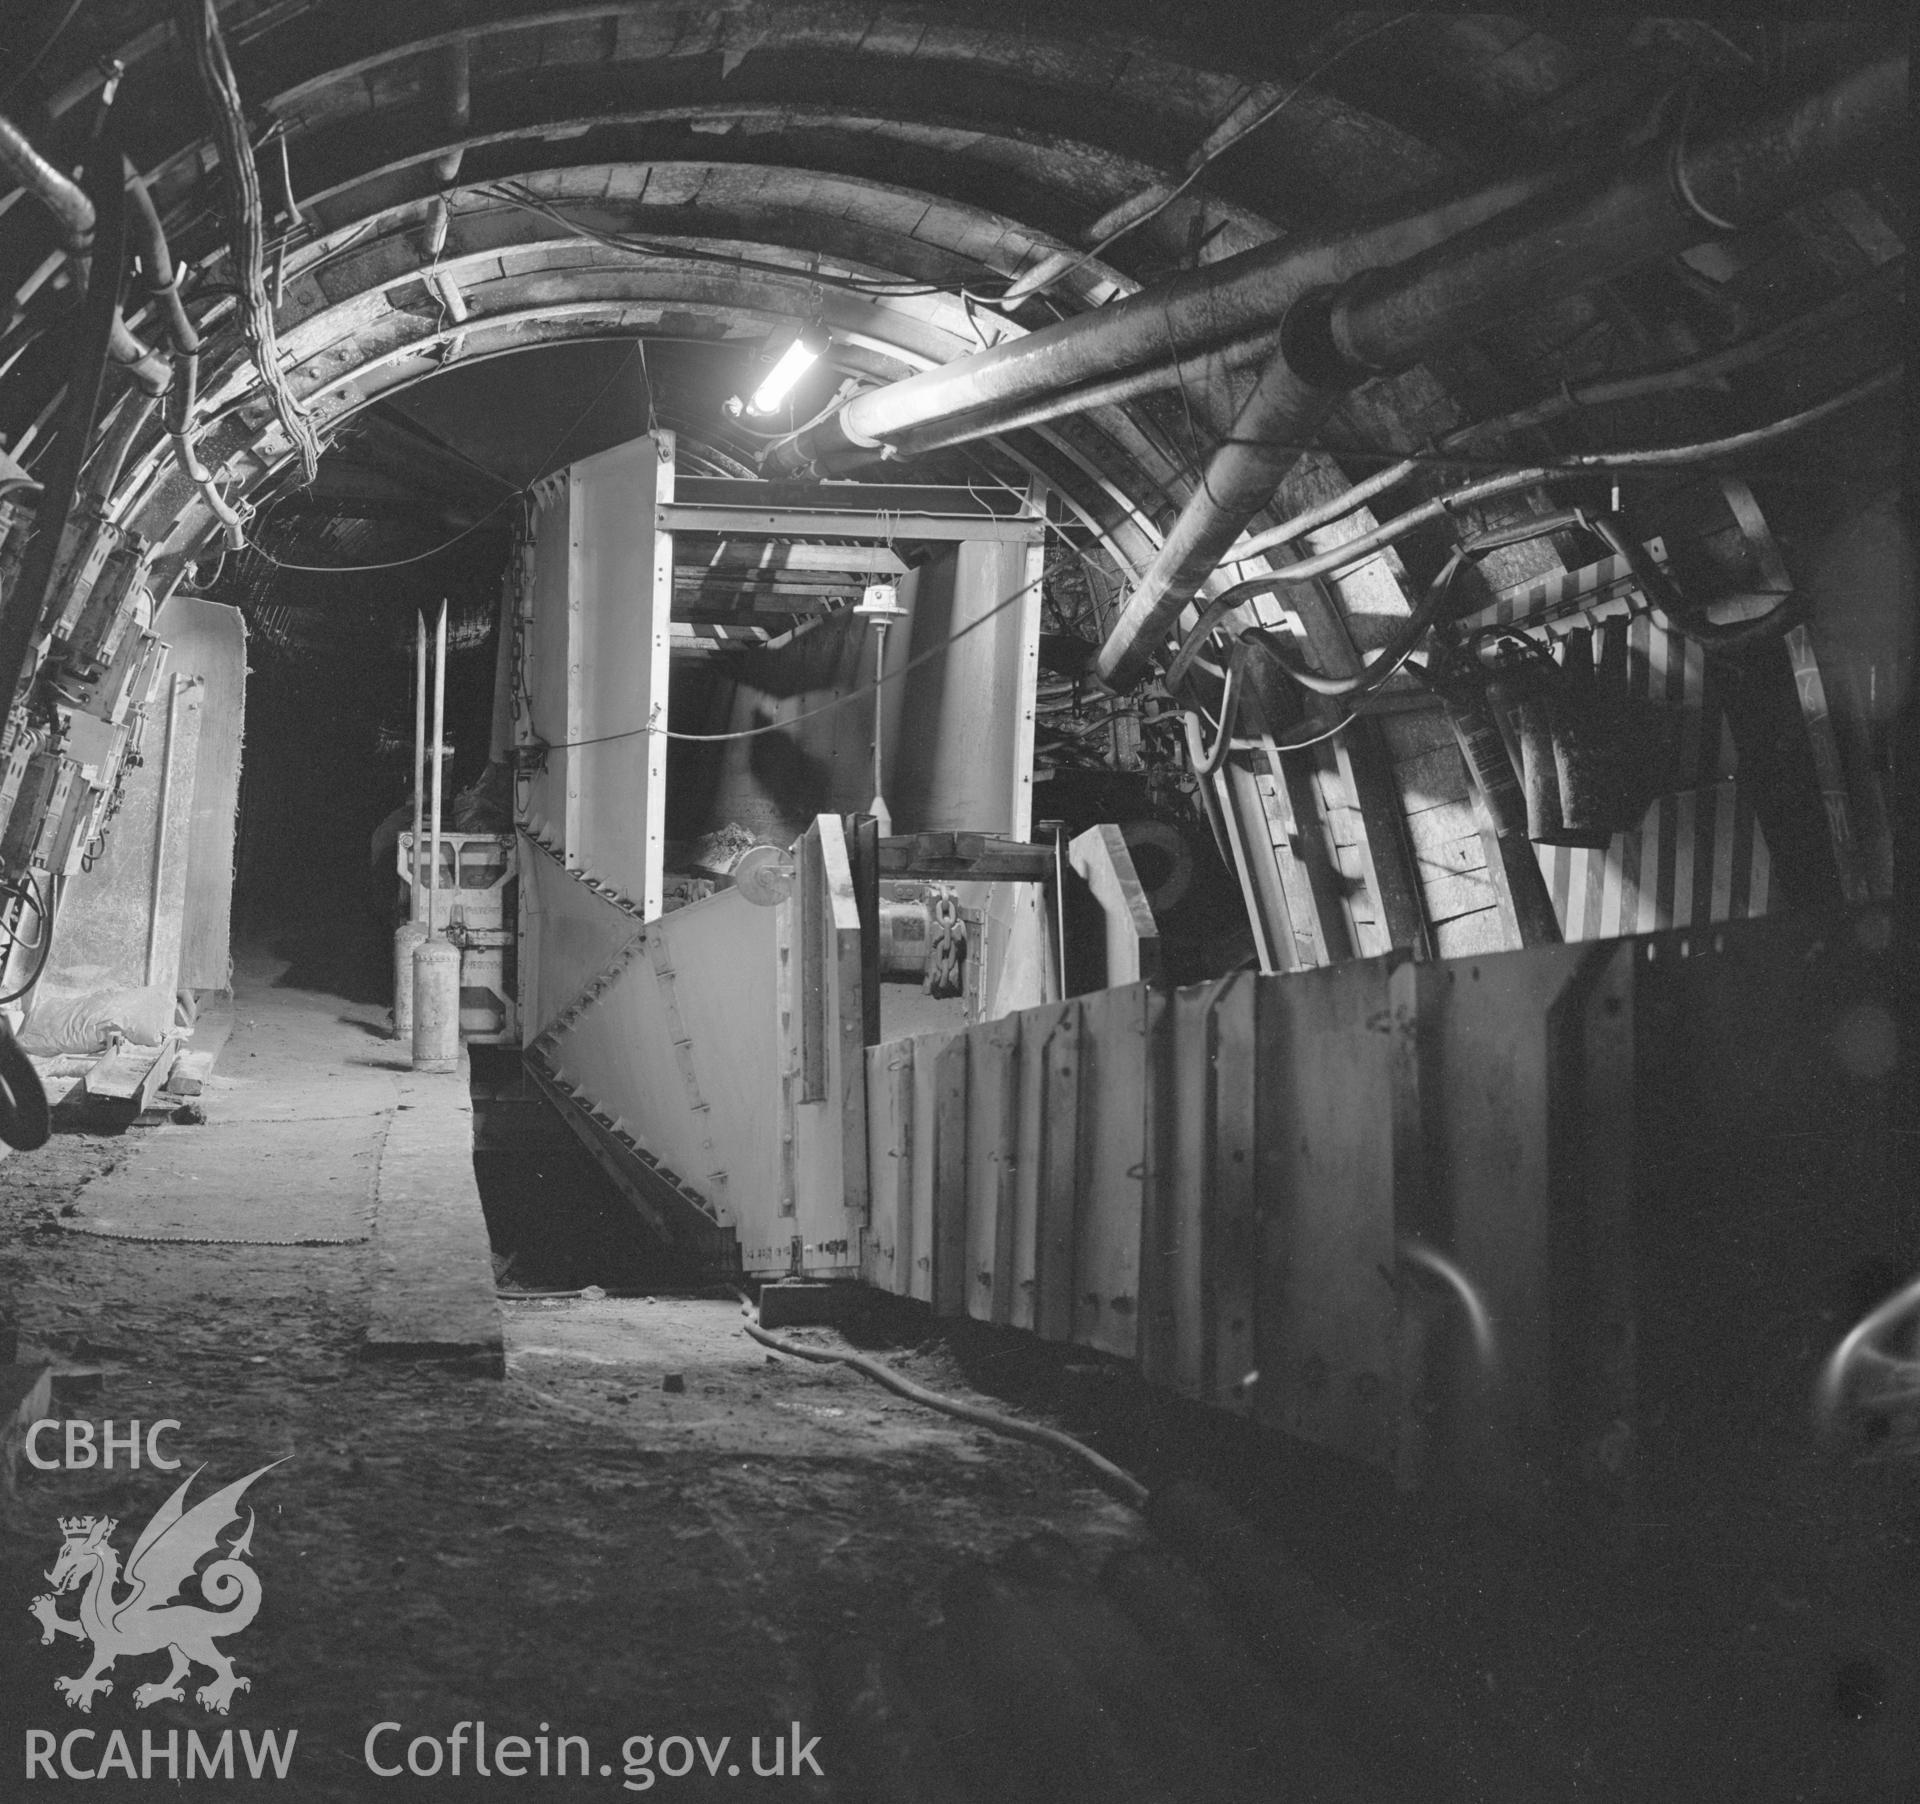 Digital copy of an acetate negative showing lump breaker on conveyor at Taff Colliery, from the John Cornwell Collection.